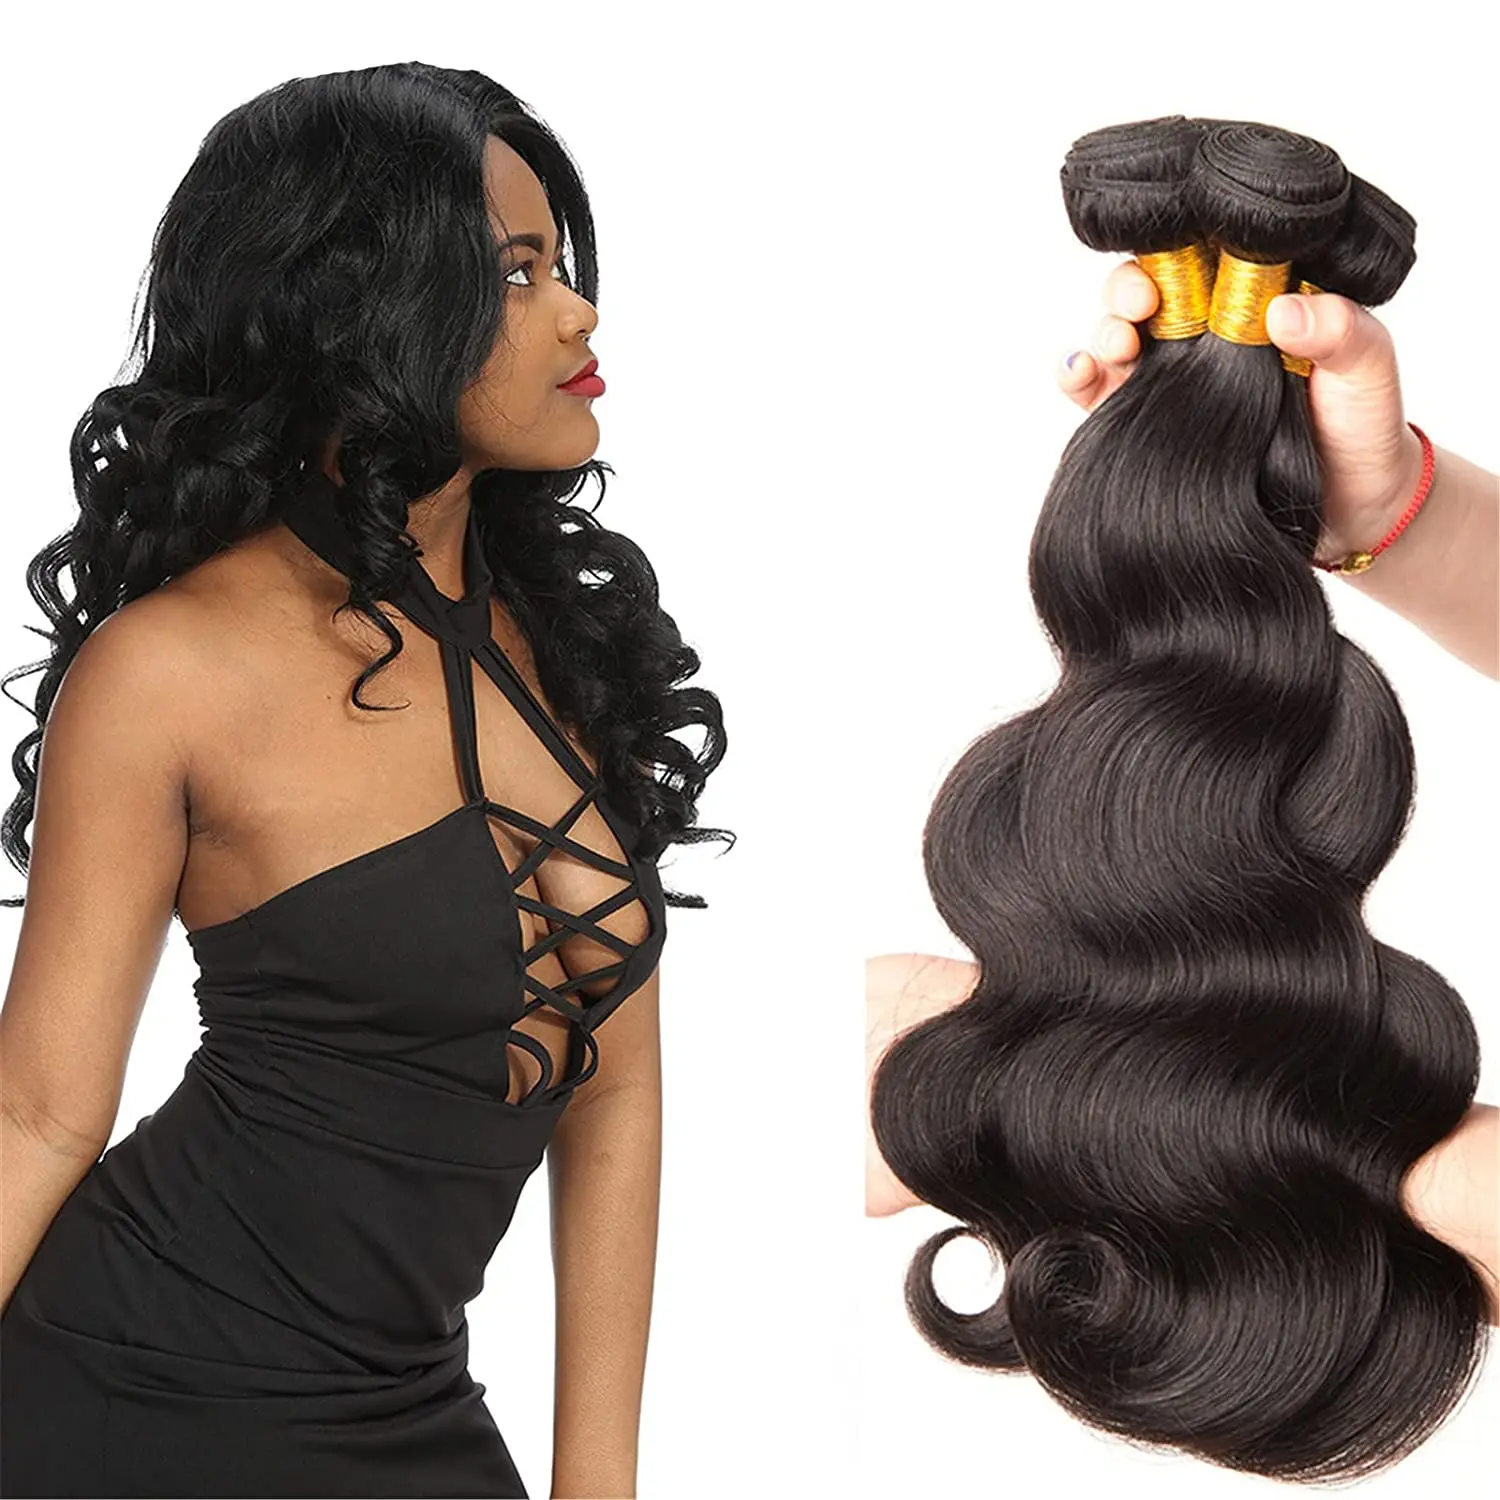 

Body Wave Human Hair Bundles for Women Loose Deep Wave Brazilian Hair with Lace Closure Natural Wavy Wig Hair Extensions